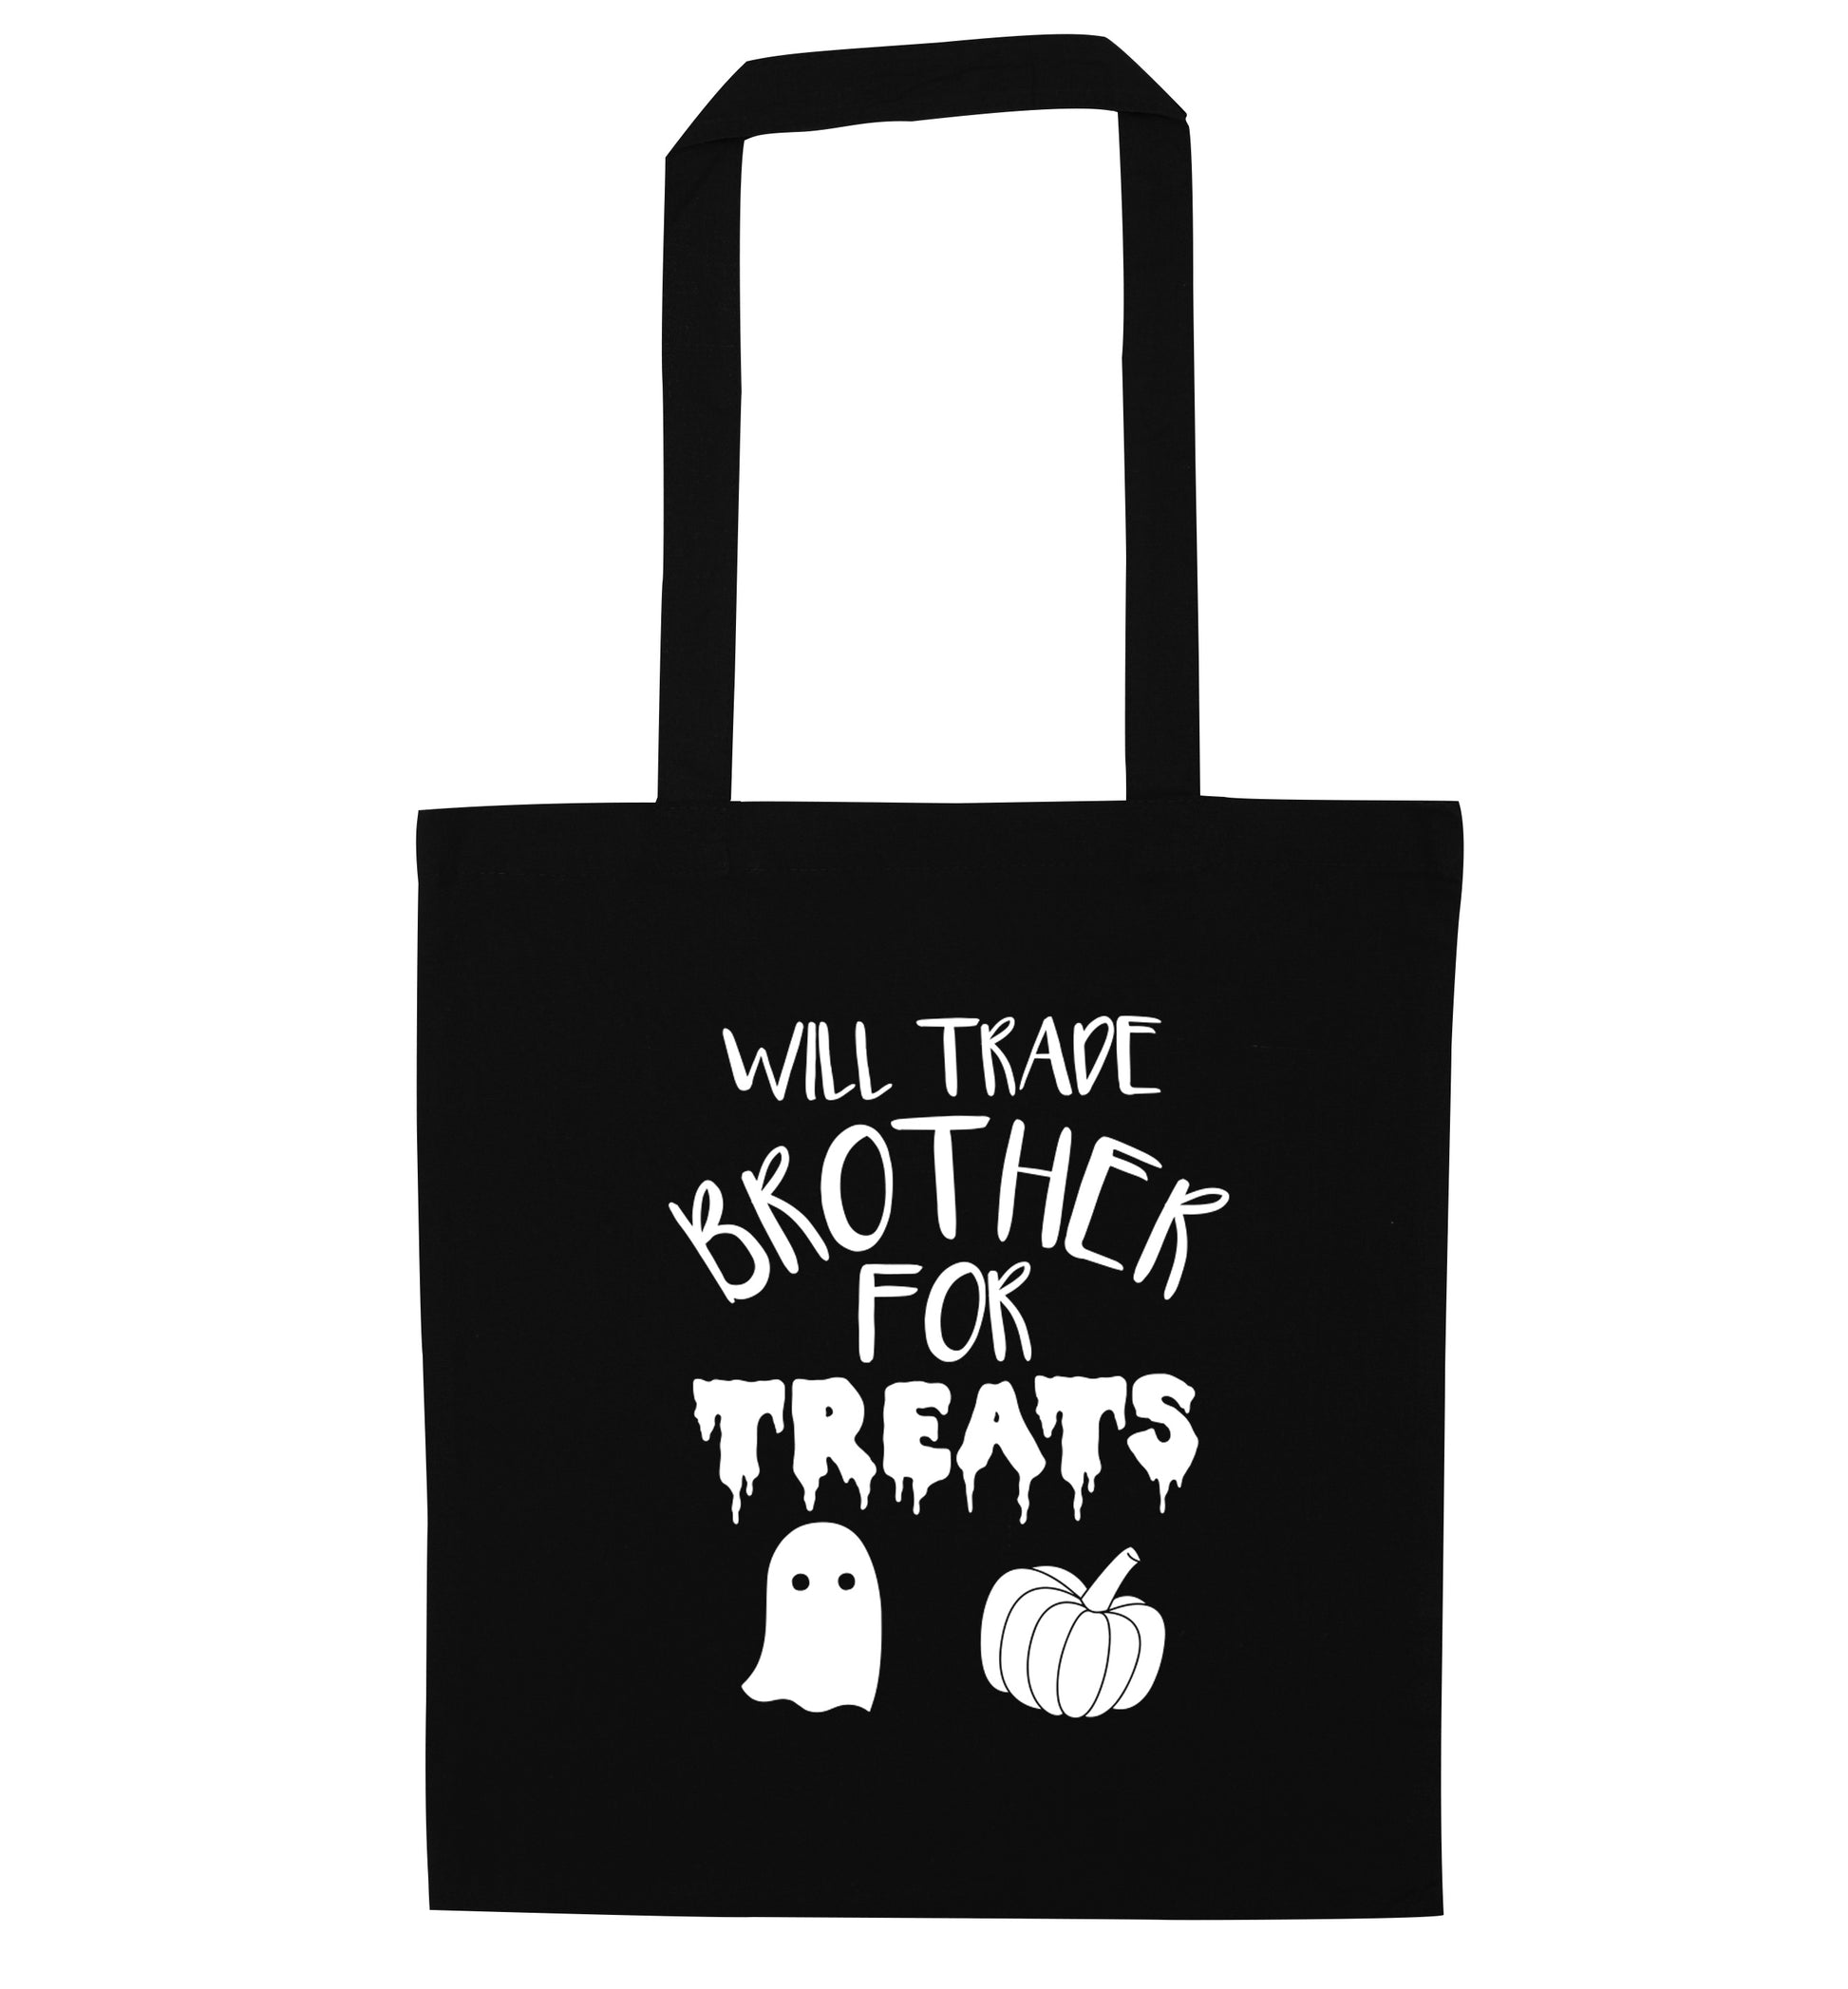 Will trade brother for sweets black tote bag